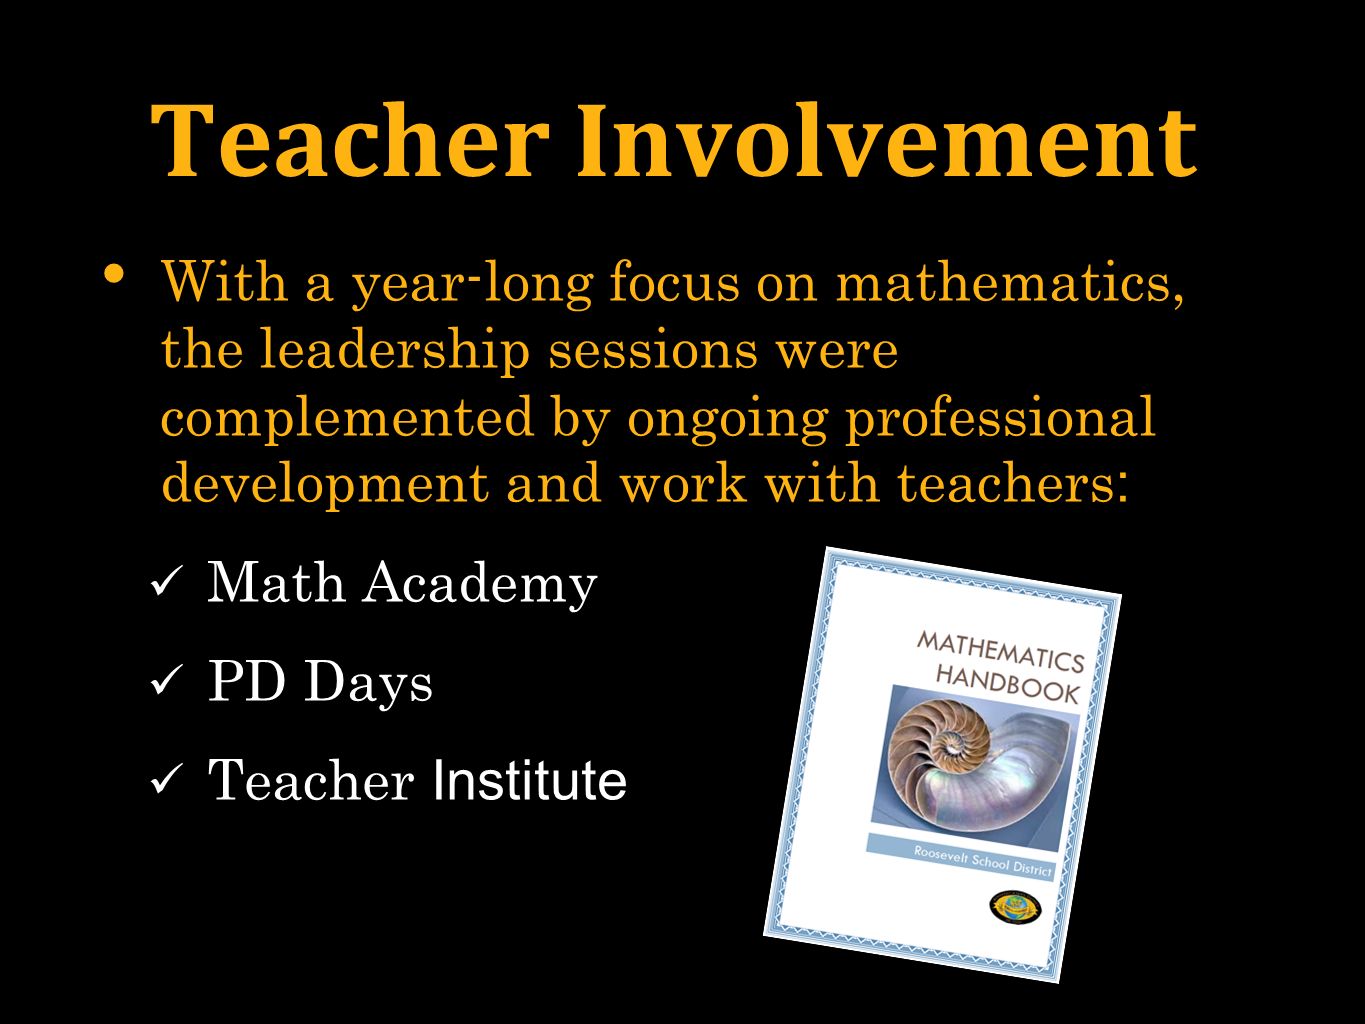 Teacher Involvement With a year-long focus on mathematics, the leadership sessions were complemented by ongoing professional development and work with teachers : Math Academy PD Days Teacher Institute